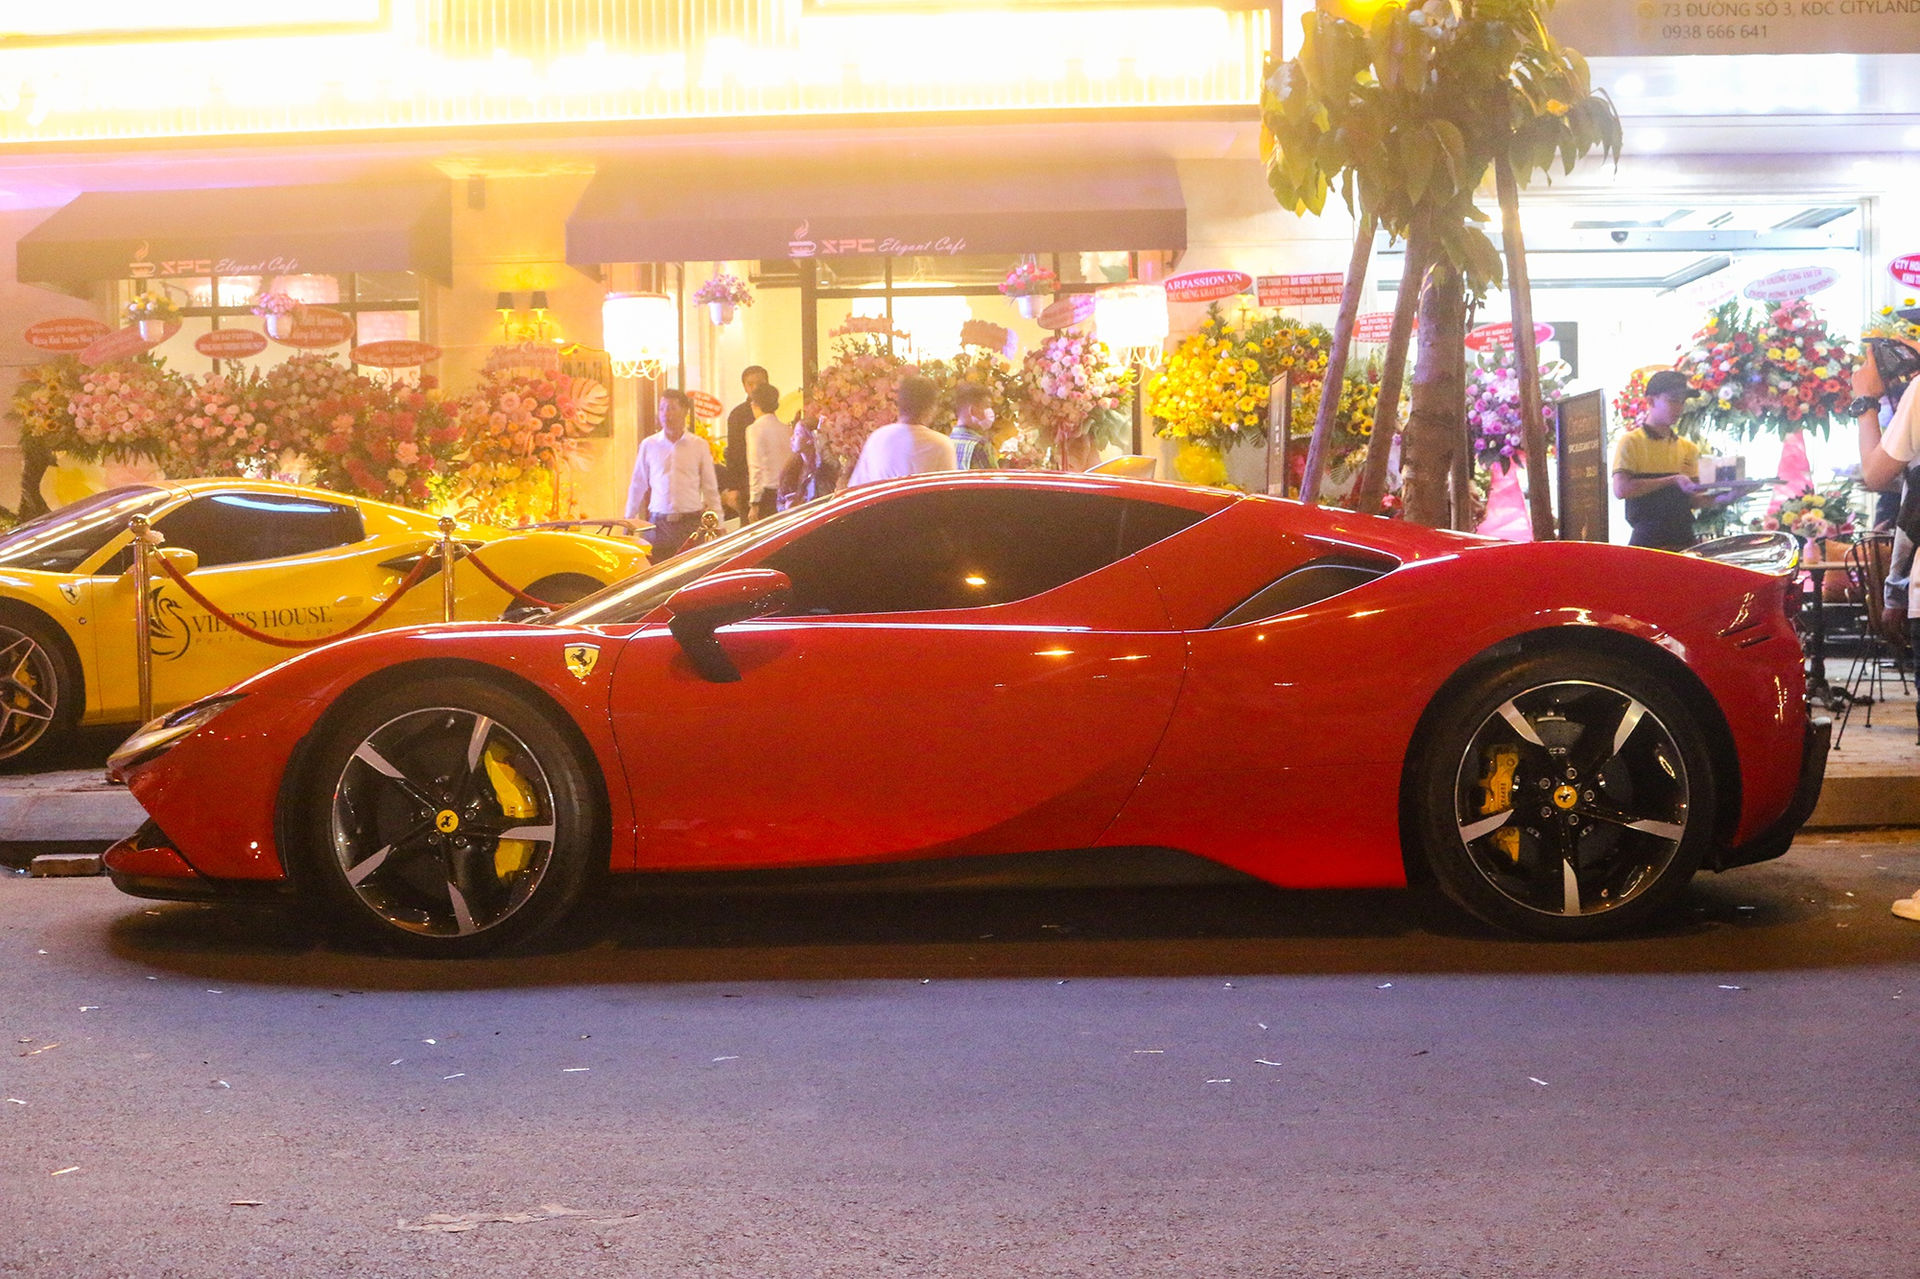 Can canh Ferrari SF90 Stradale anh 3